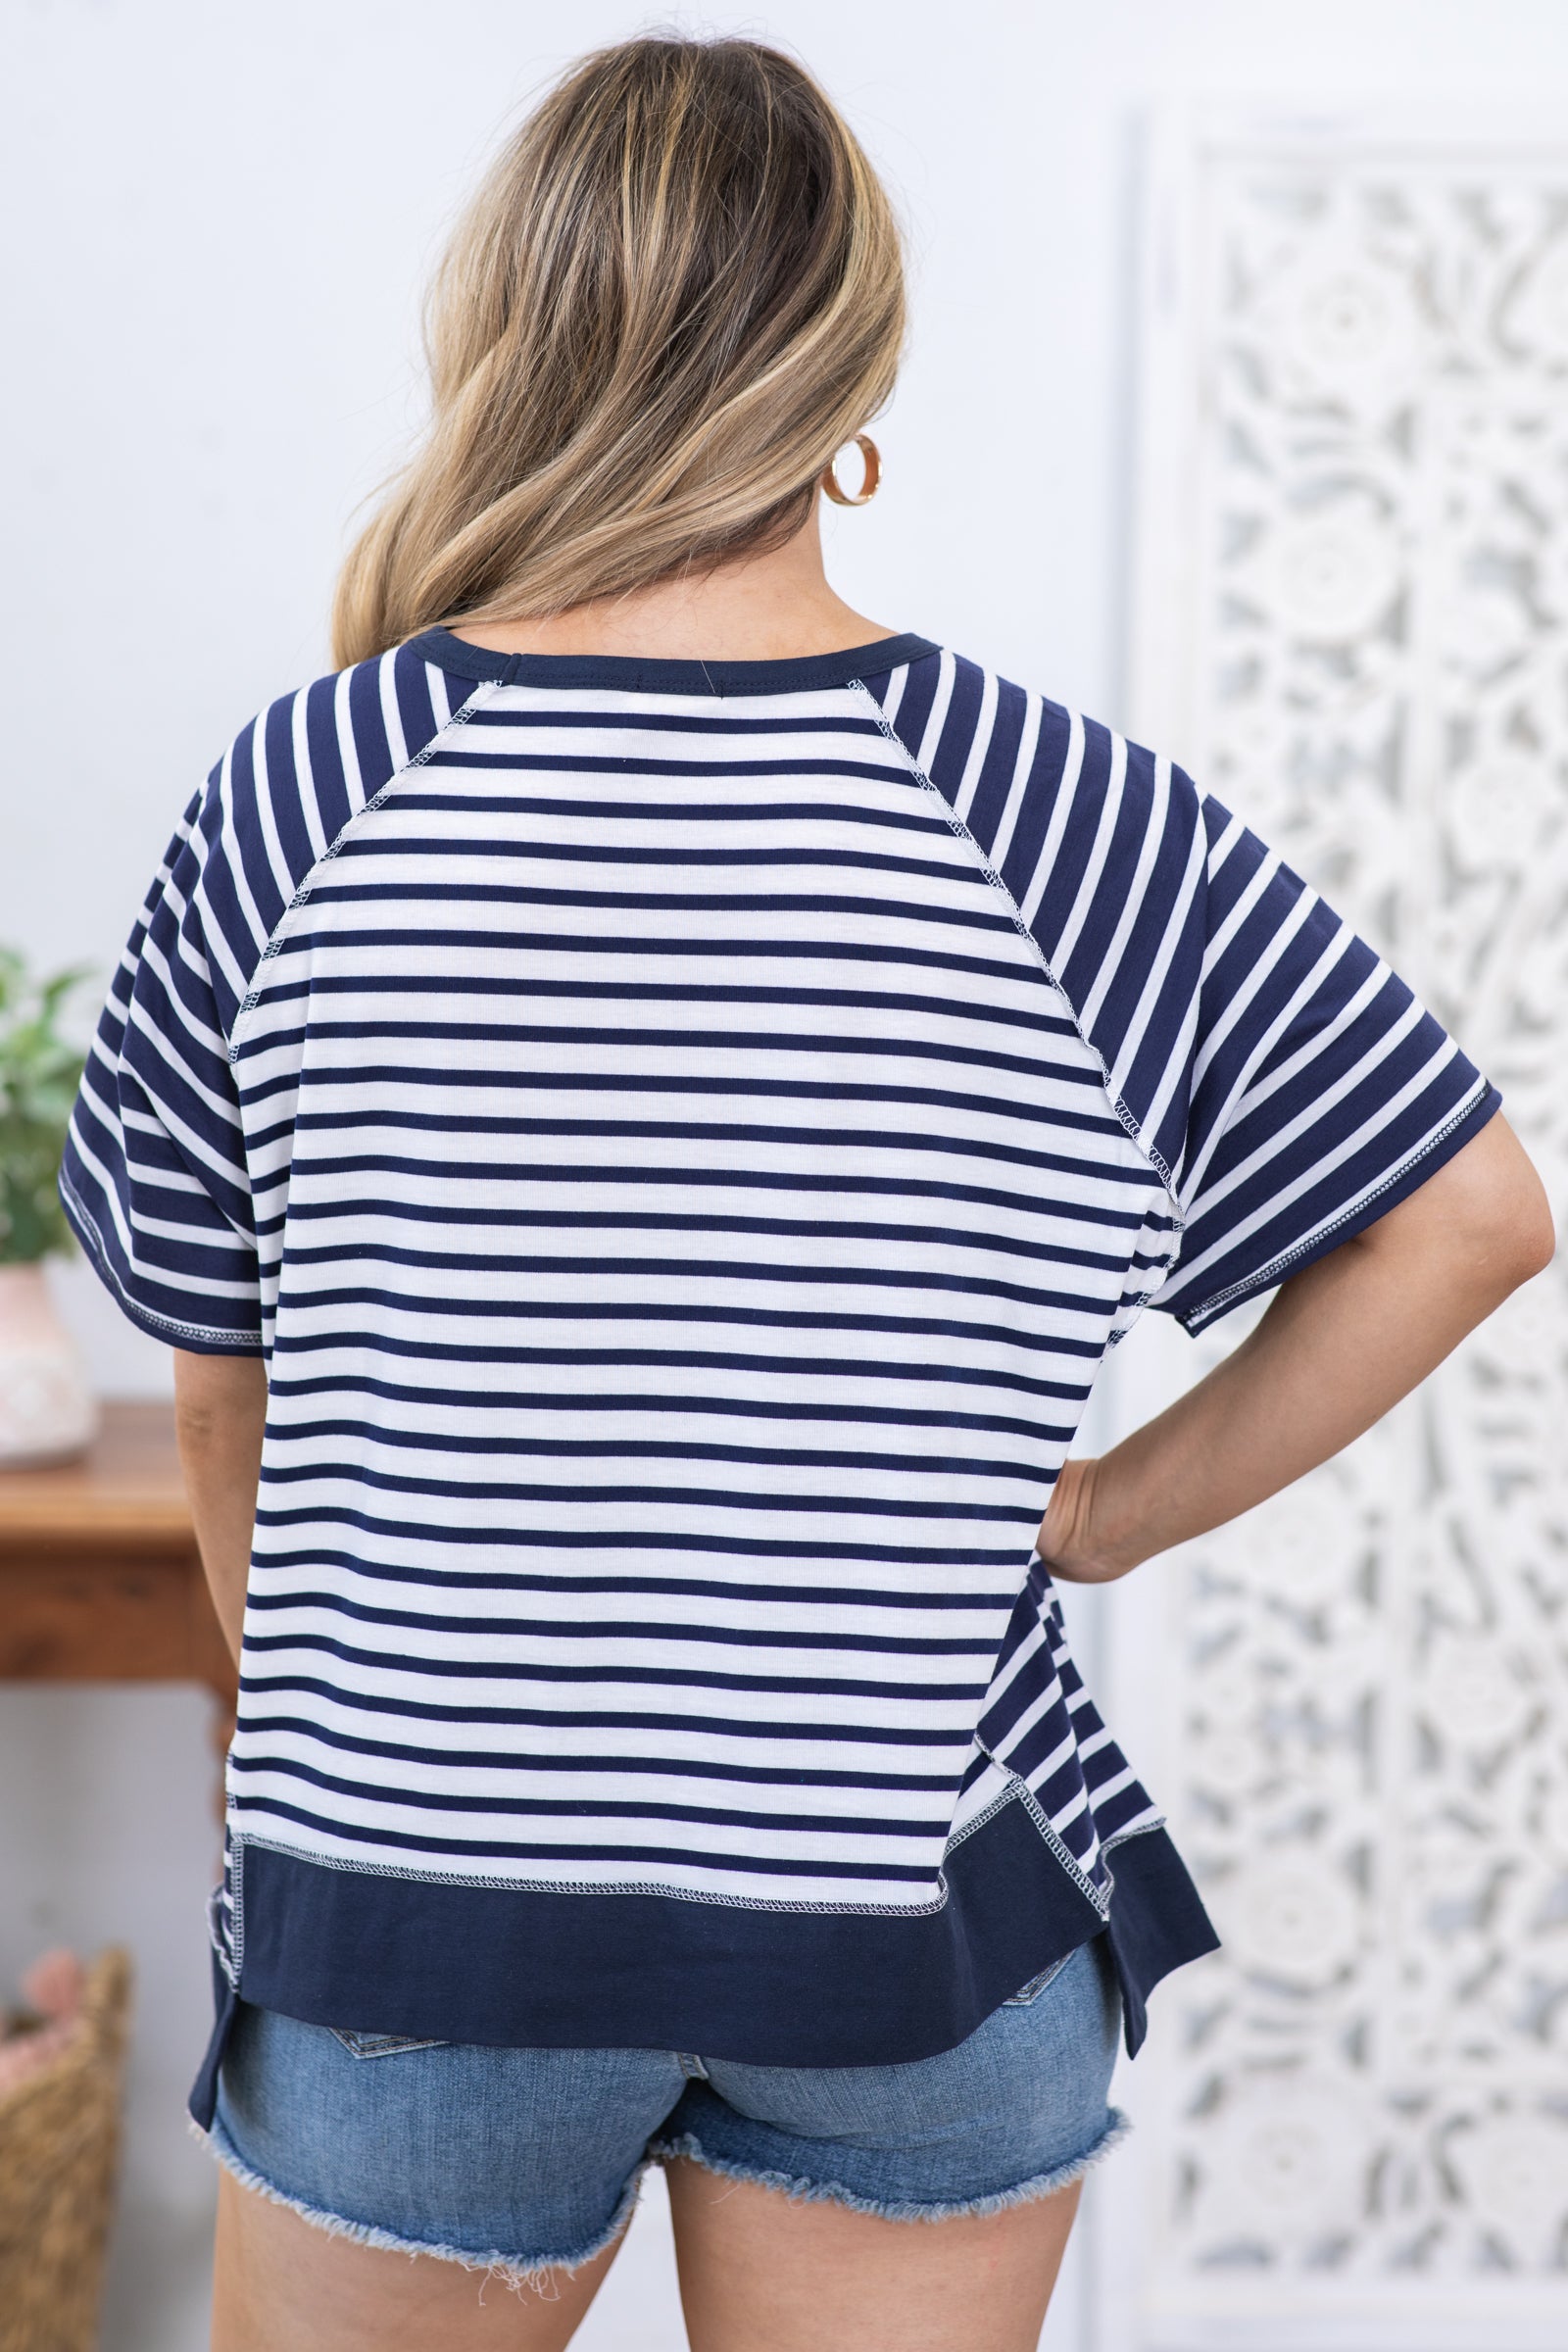 Navy and White Stripe Stitch Contrast Knit Top